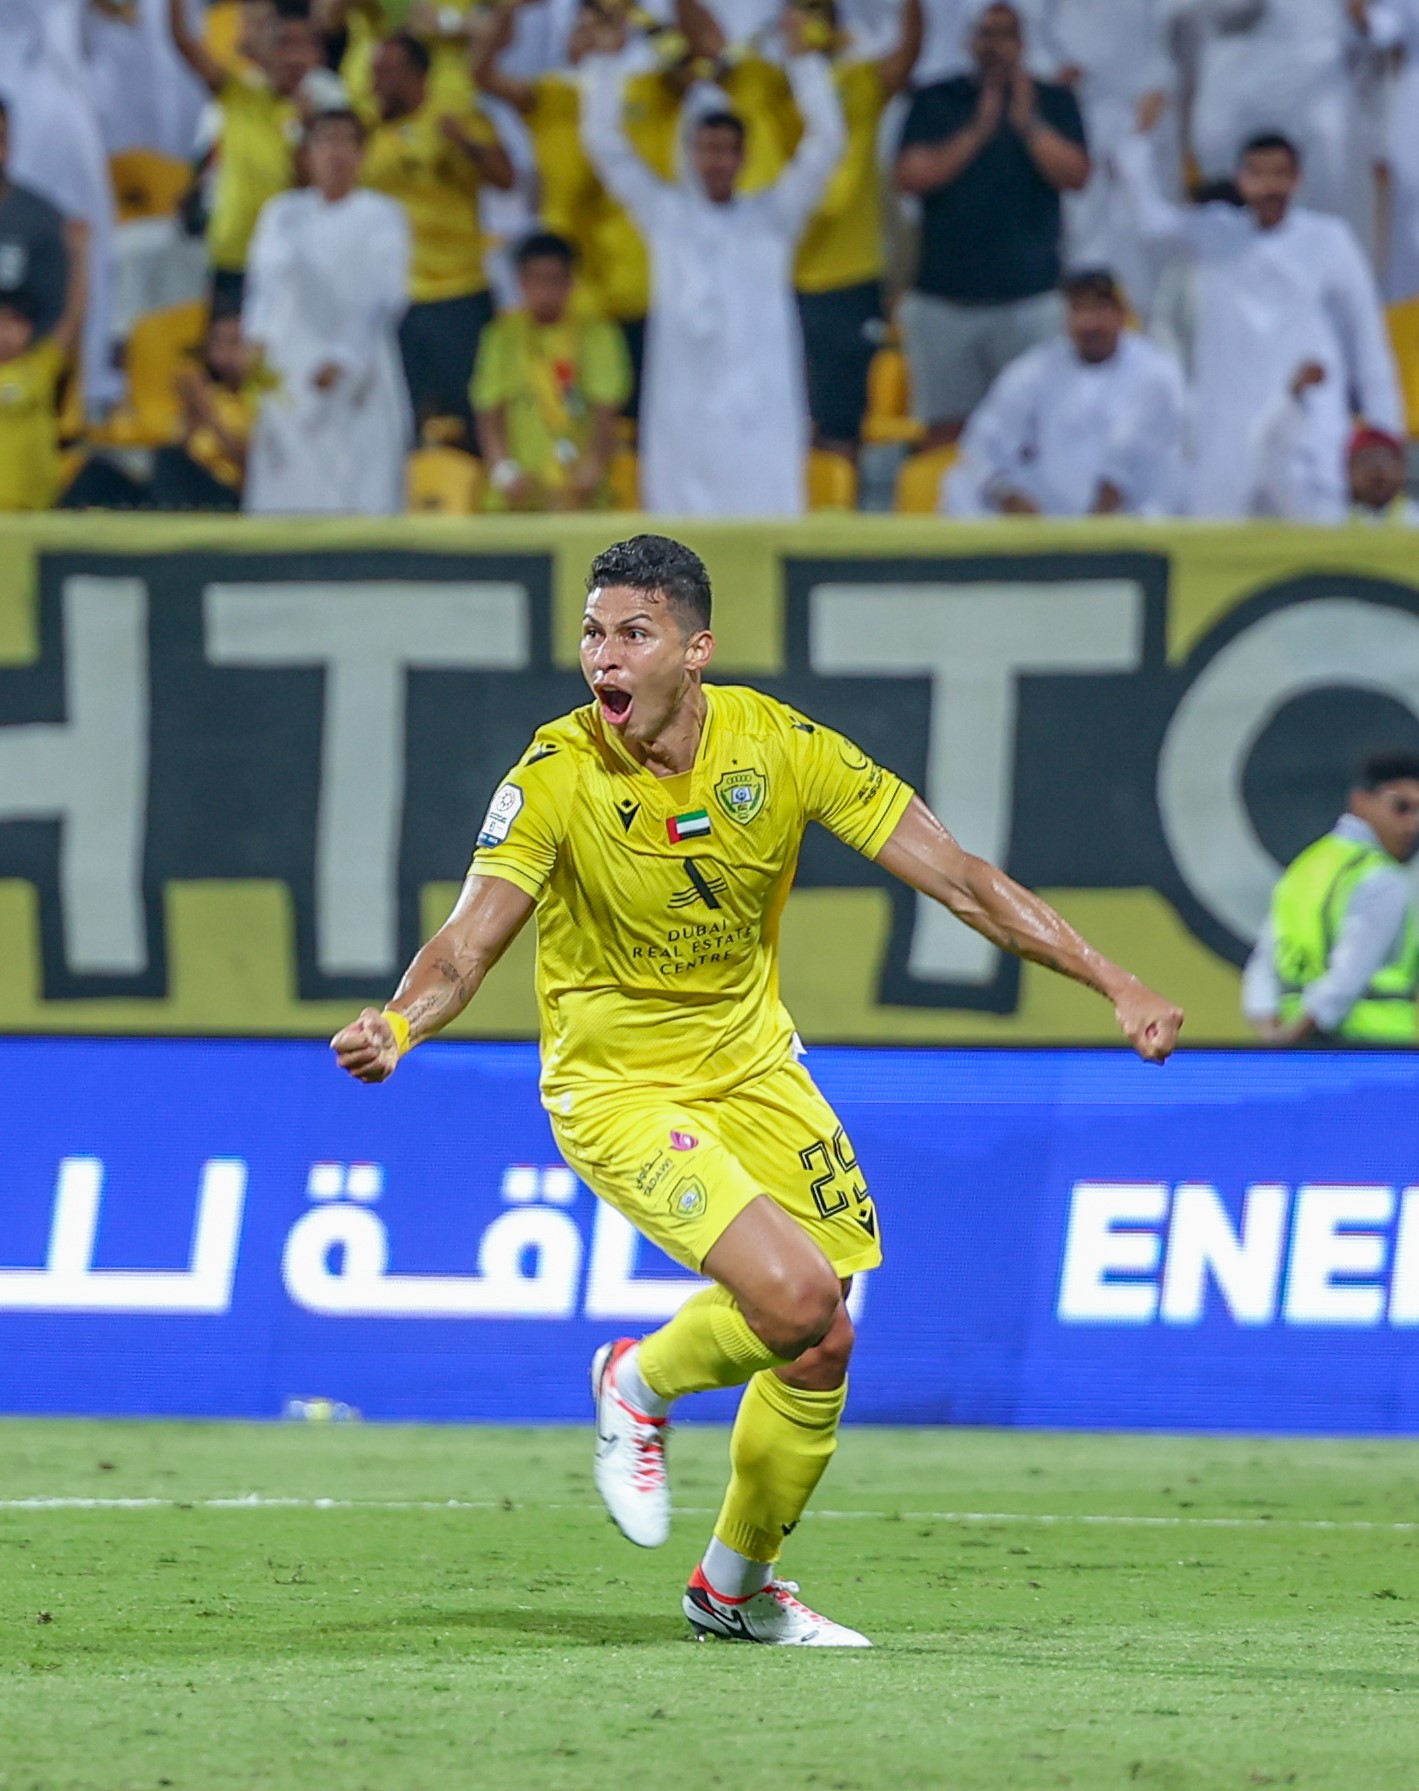 The Emperor's scoring spree continues as it defeats Al-Bataeh 4-1 and strengthens its lead.